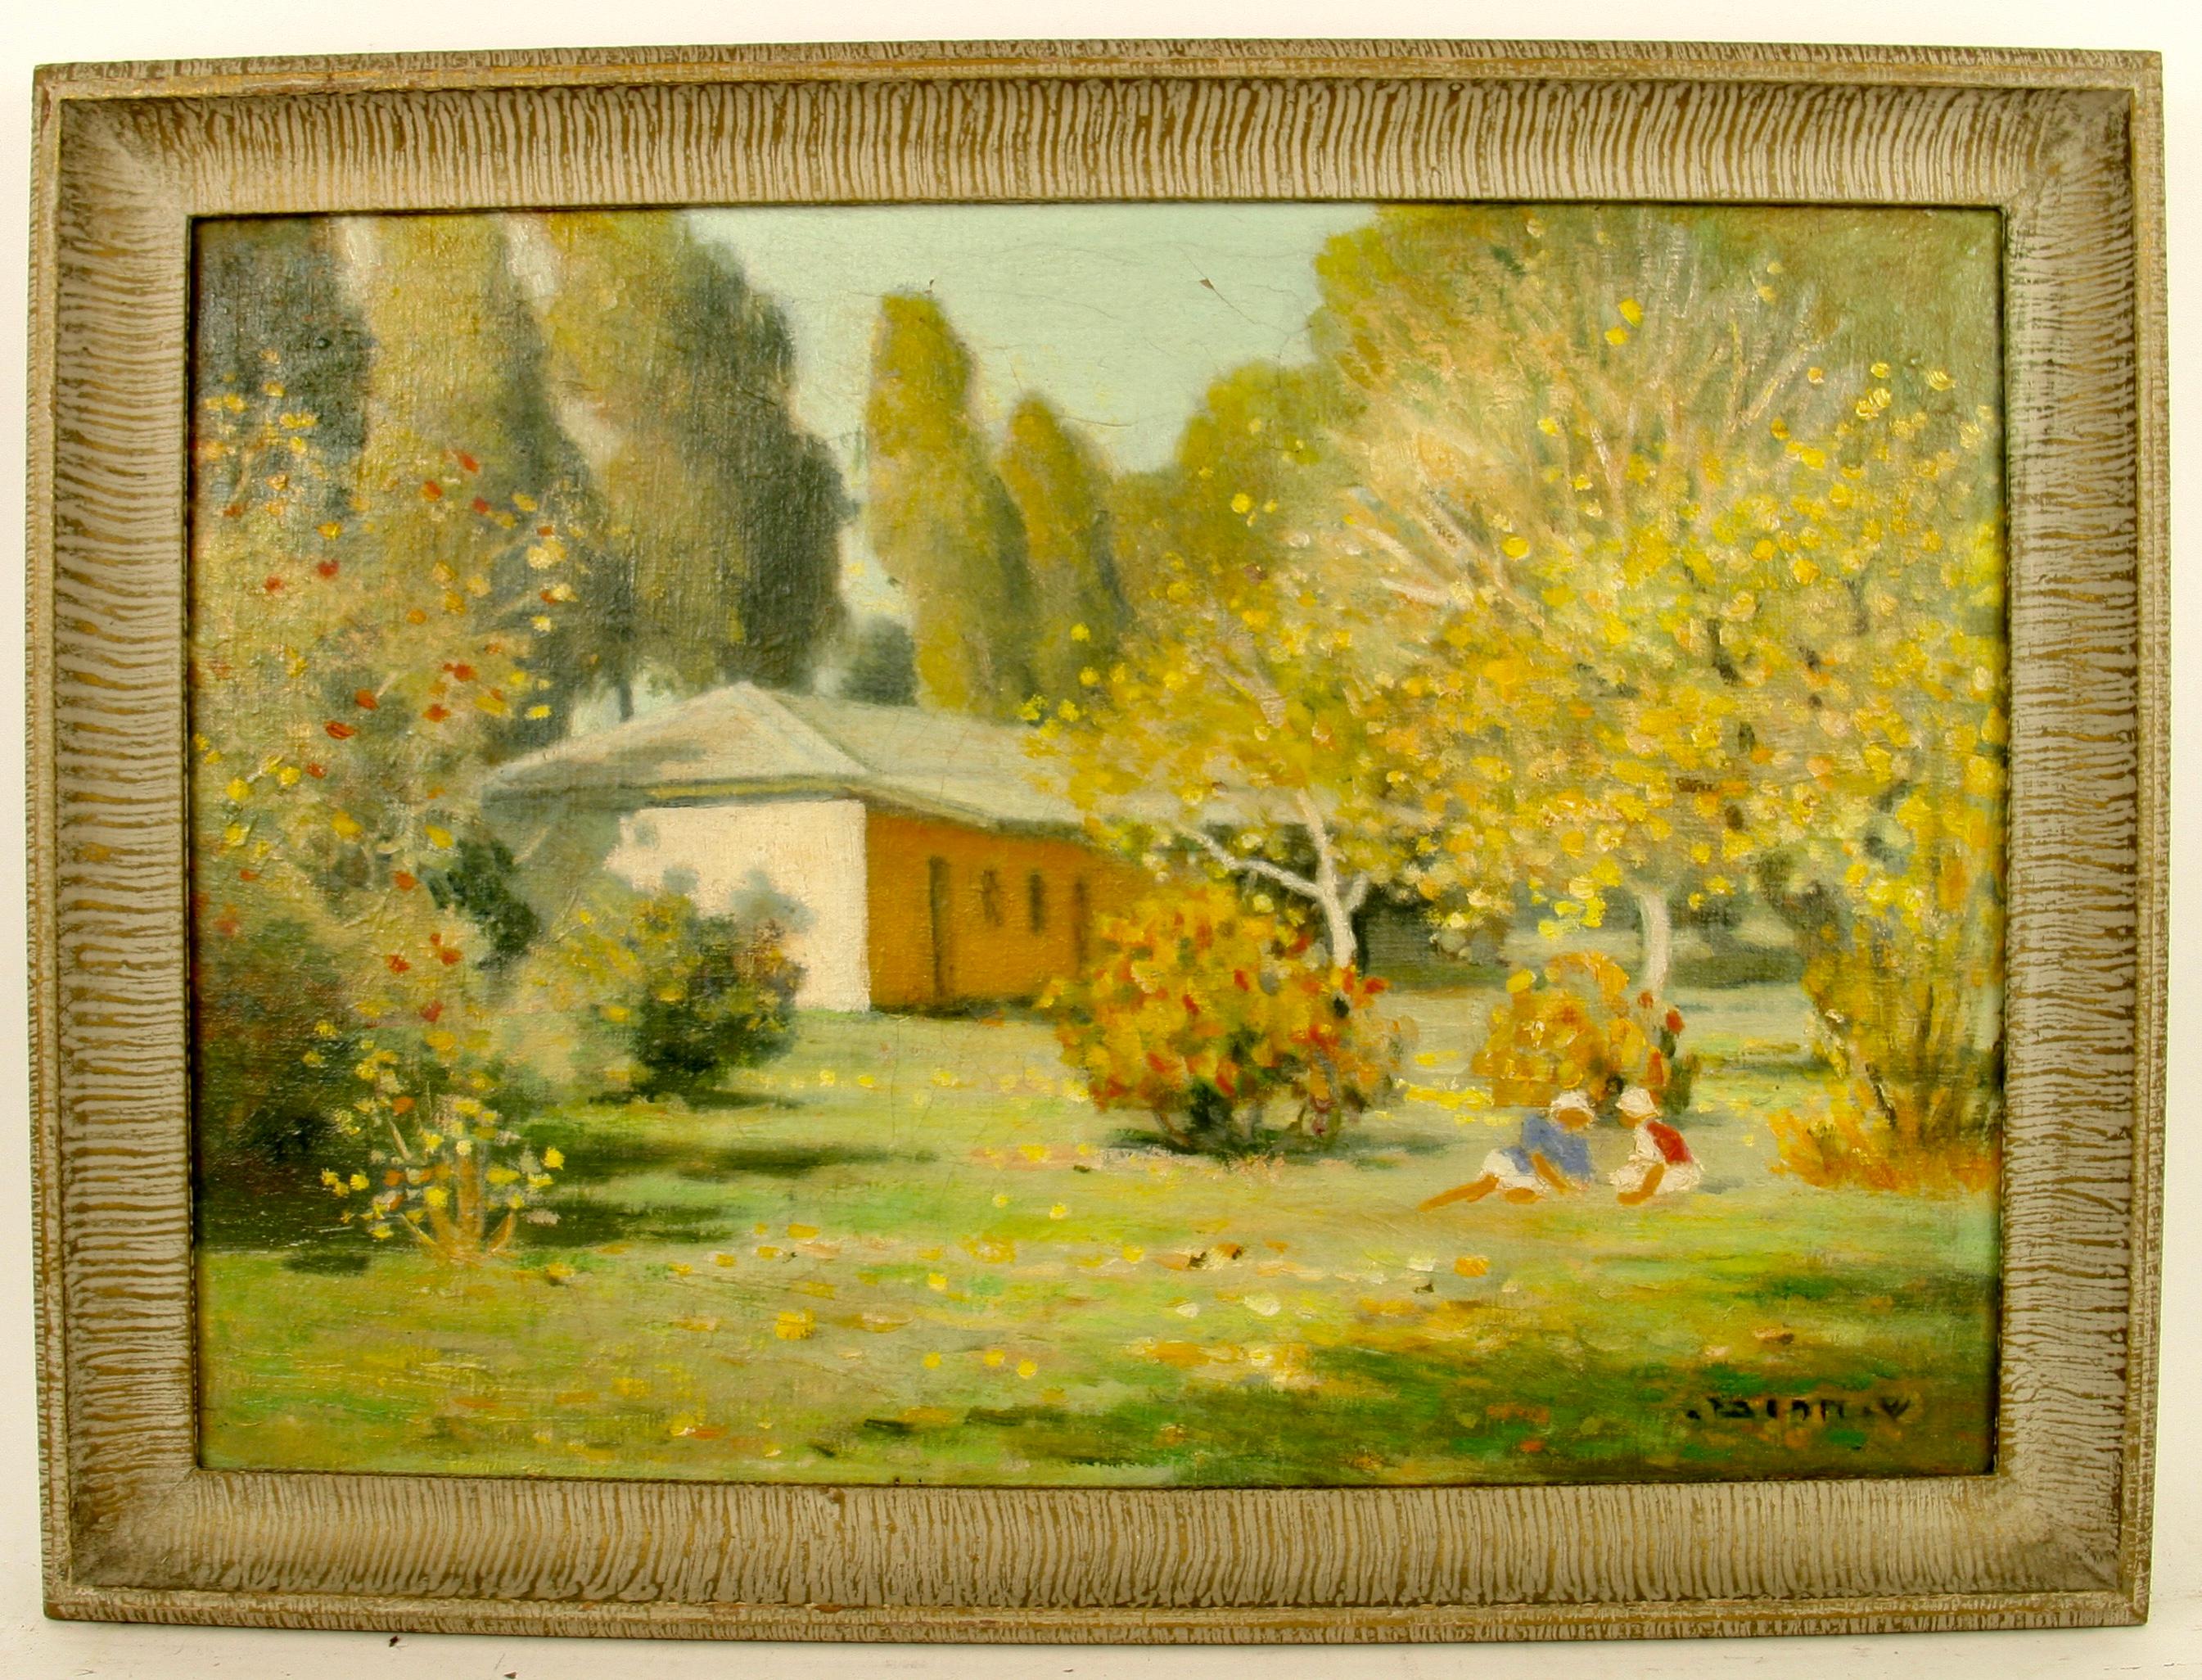 Antique Impressionistic Landscape Oil Painting  with Children Circa 1940's For Sale 3